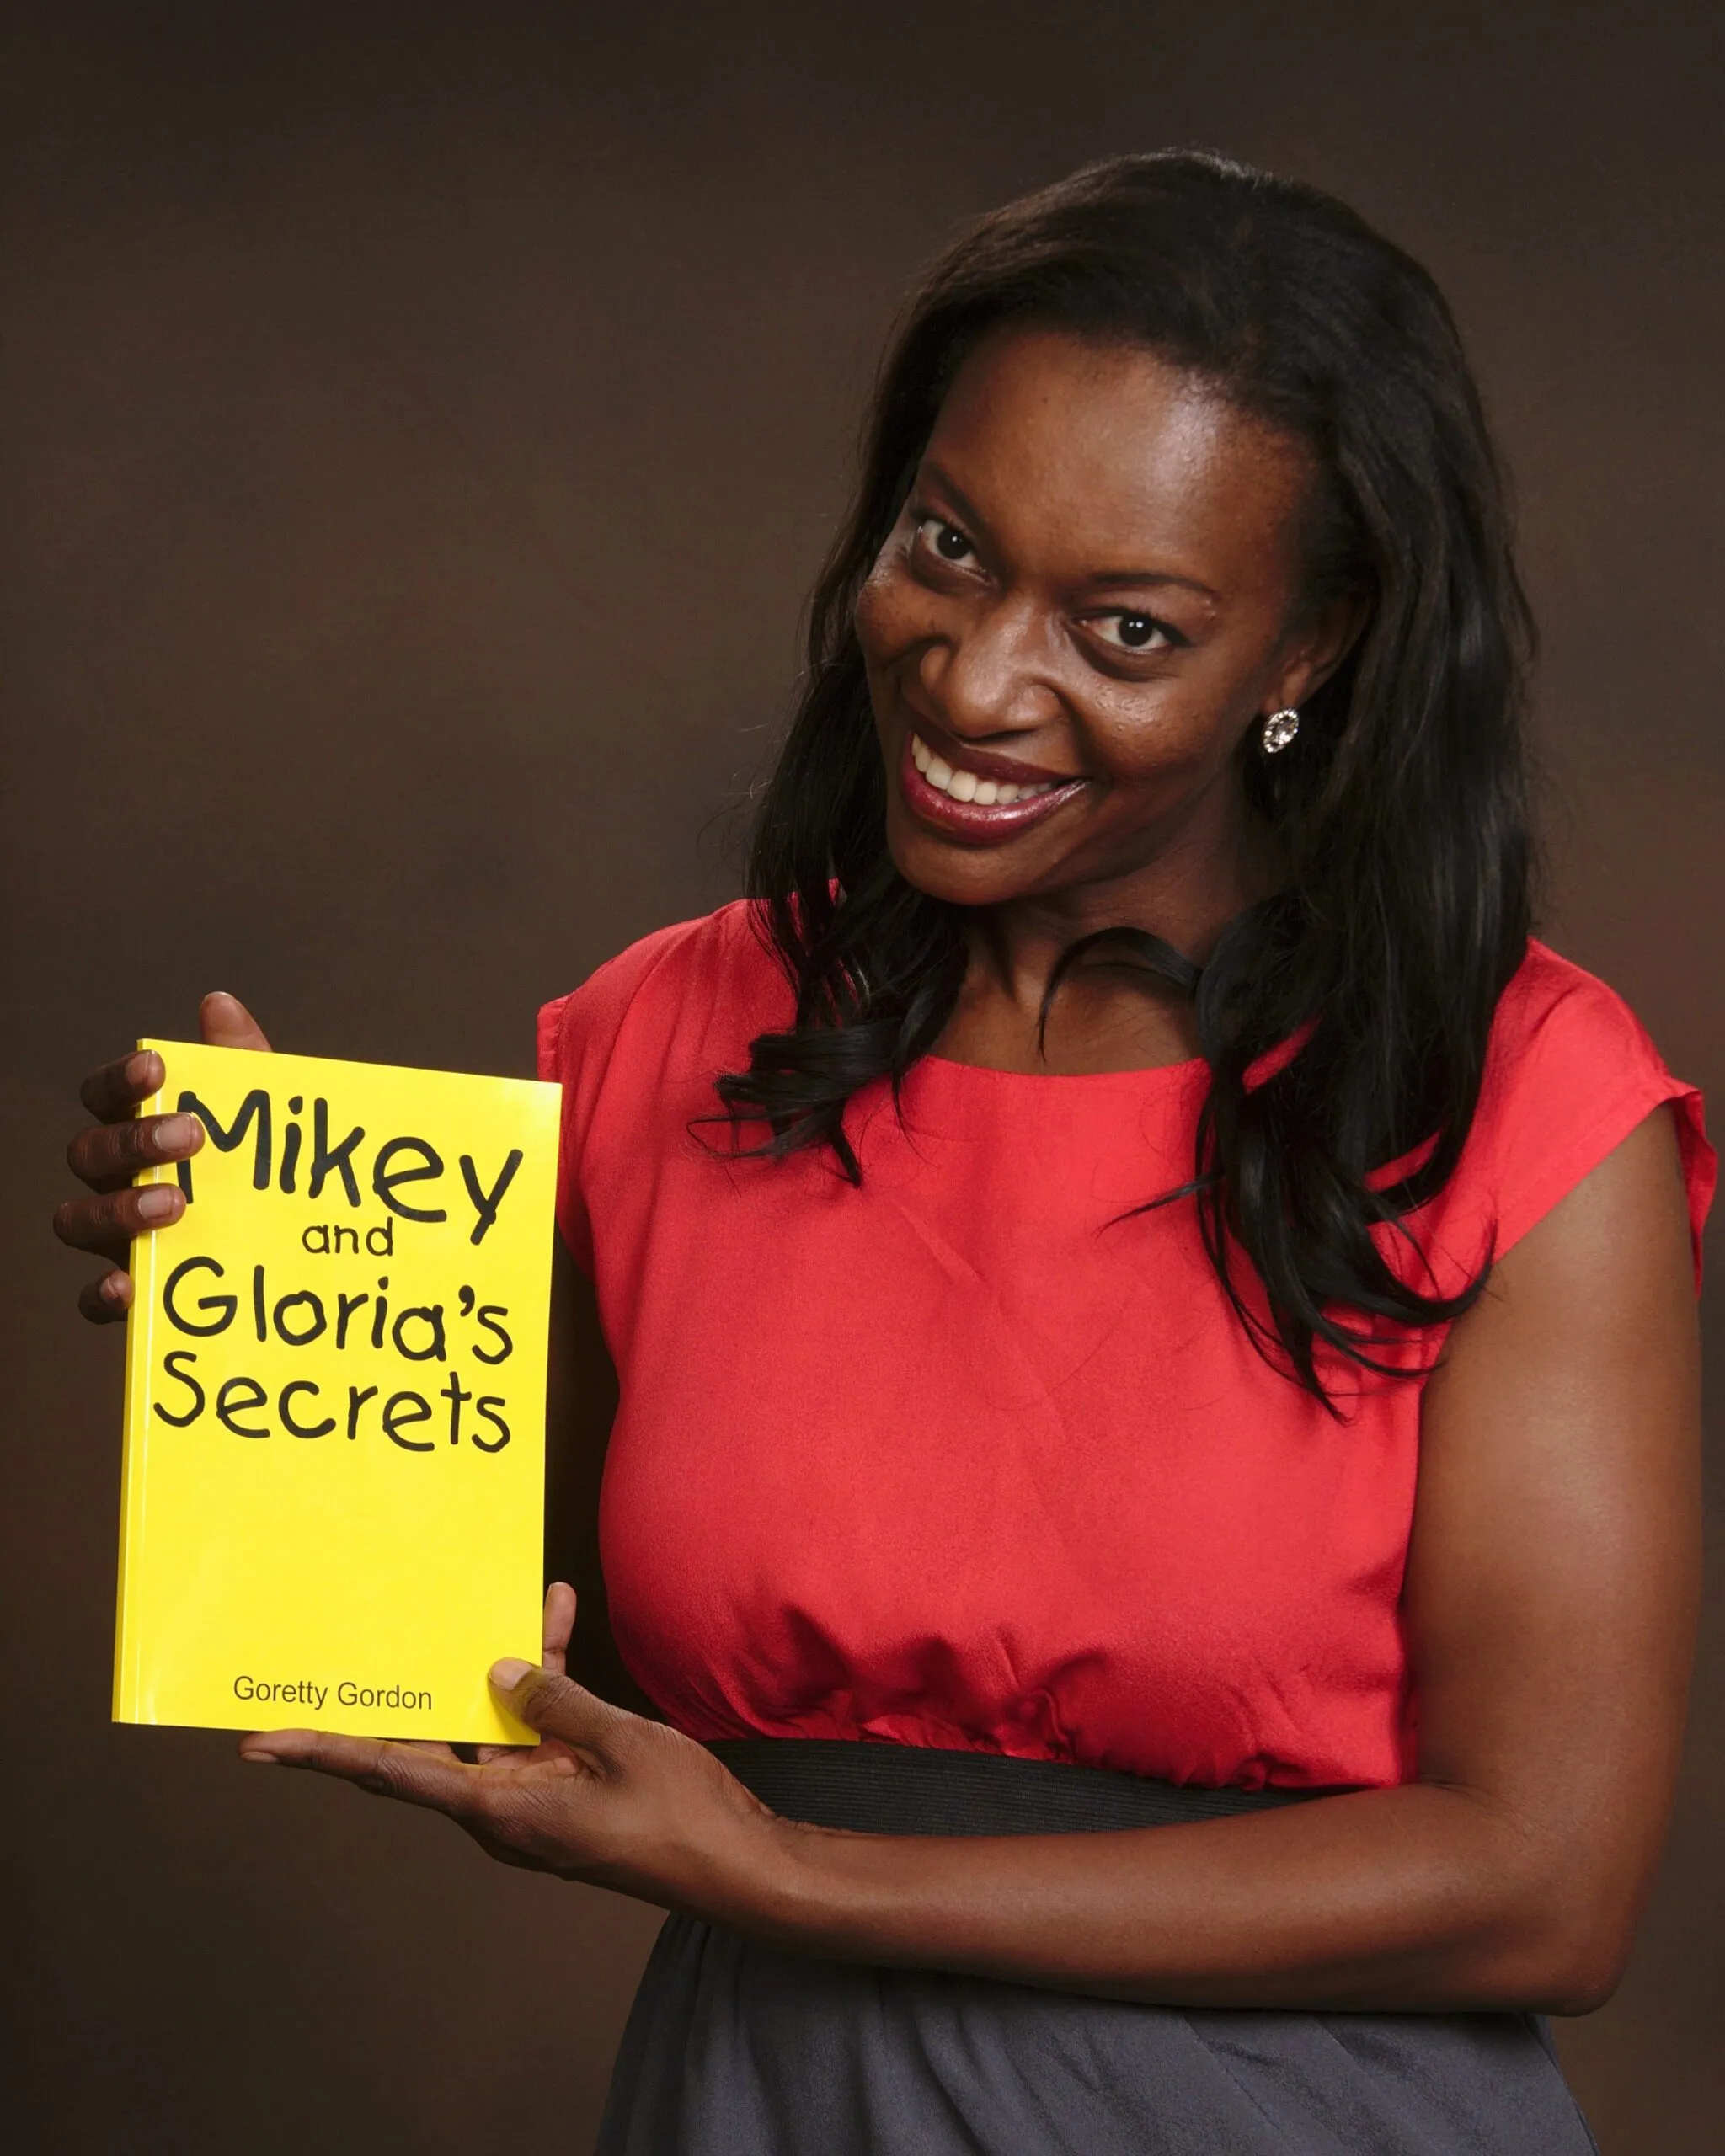 Kreyolicious in Memoriam | Interview: Goretty Gordon, Author of Mikey and Gloria's Secrets Talks About Her Self-Publishing Journey